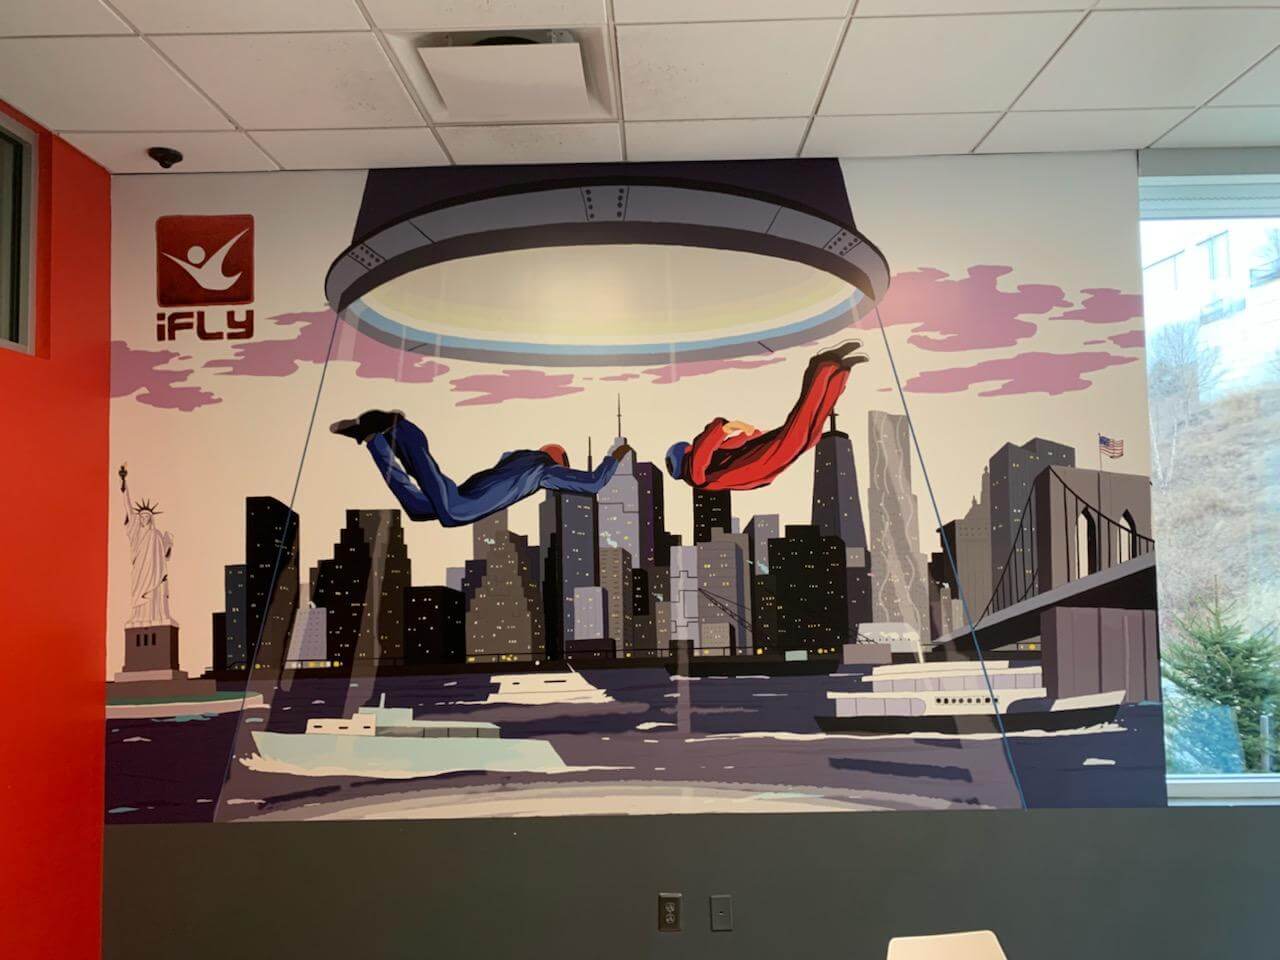 iFLY Skydiving wall covering graphic